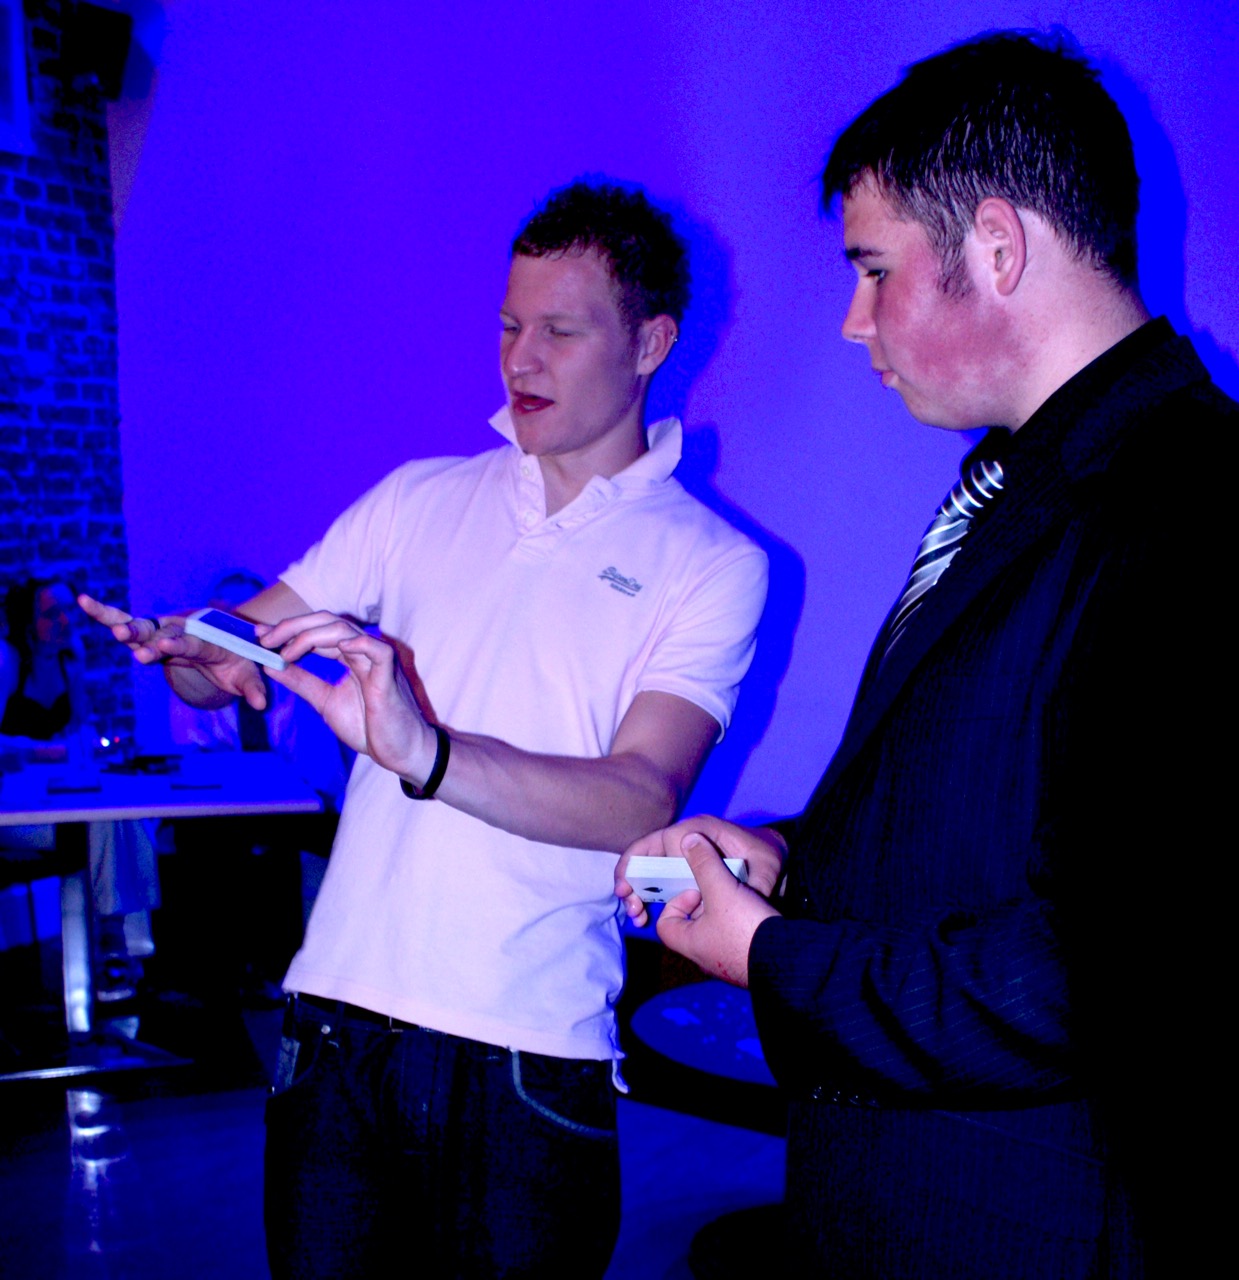 Street Magician Liam Walsh performing close up magic at DVD Launch Party in Brighton